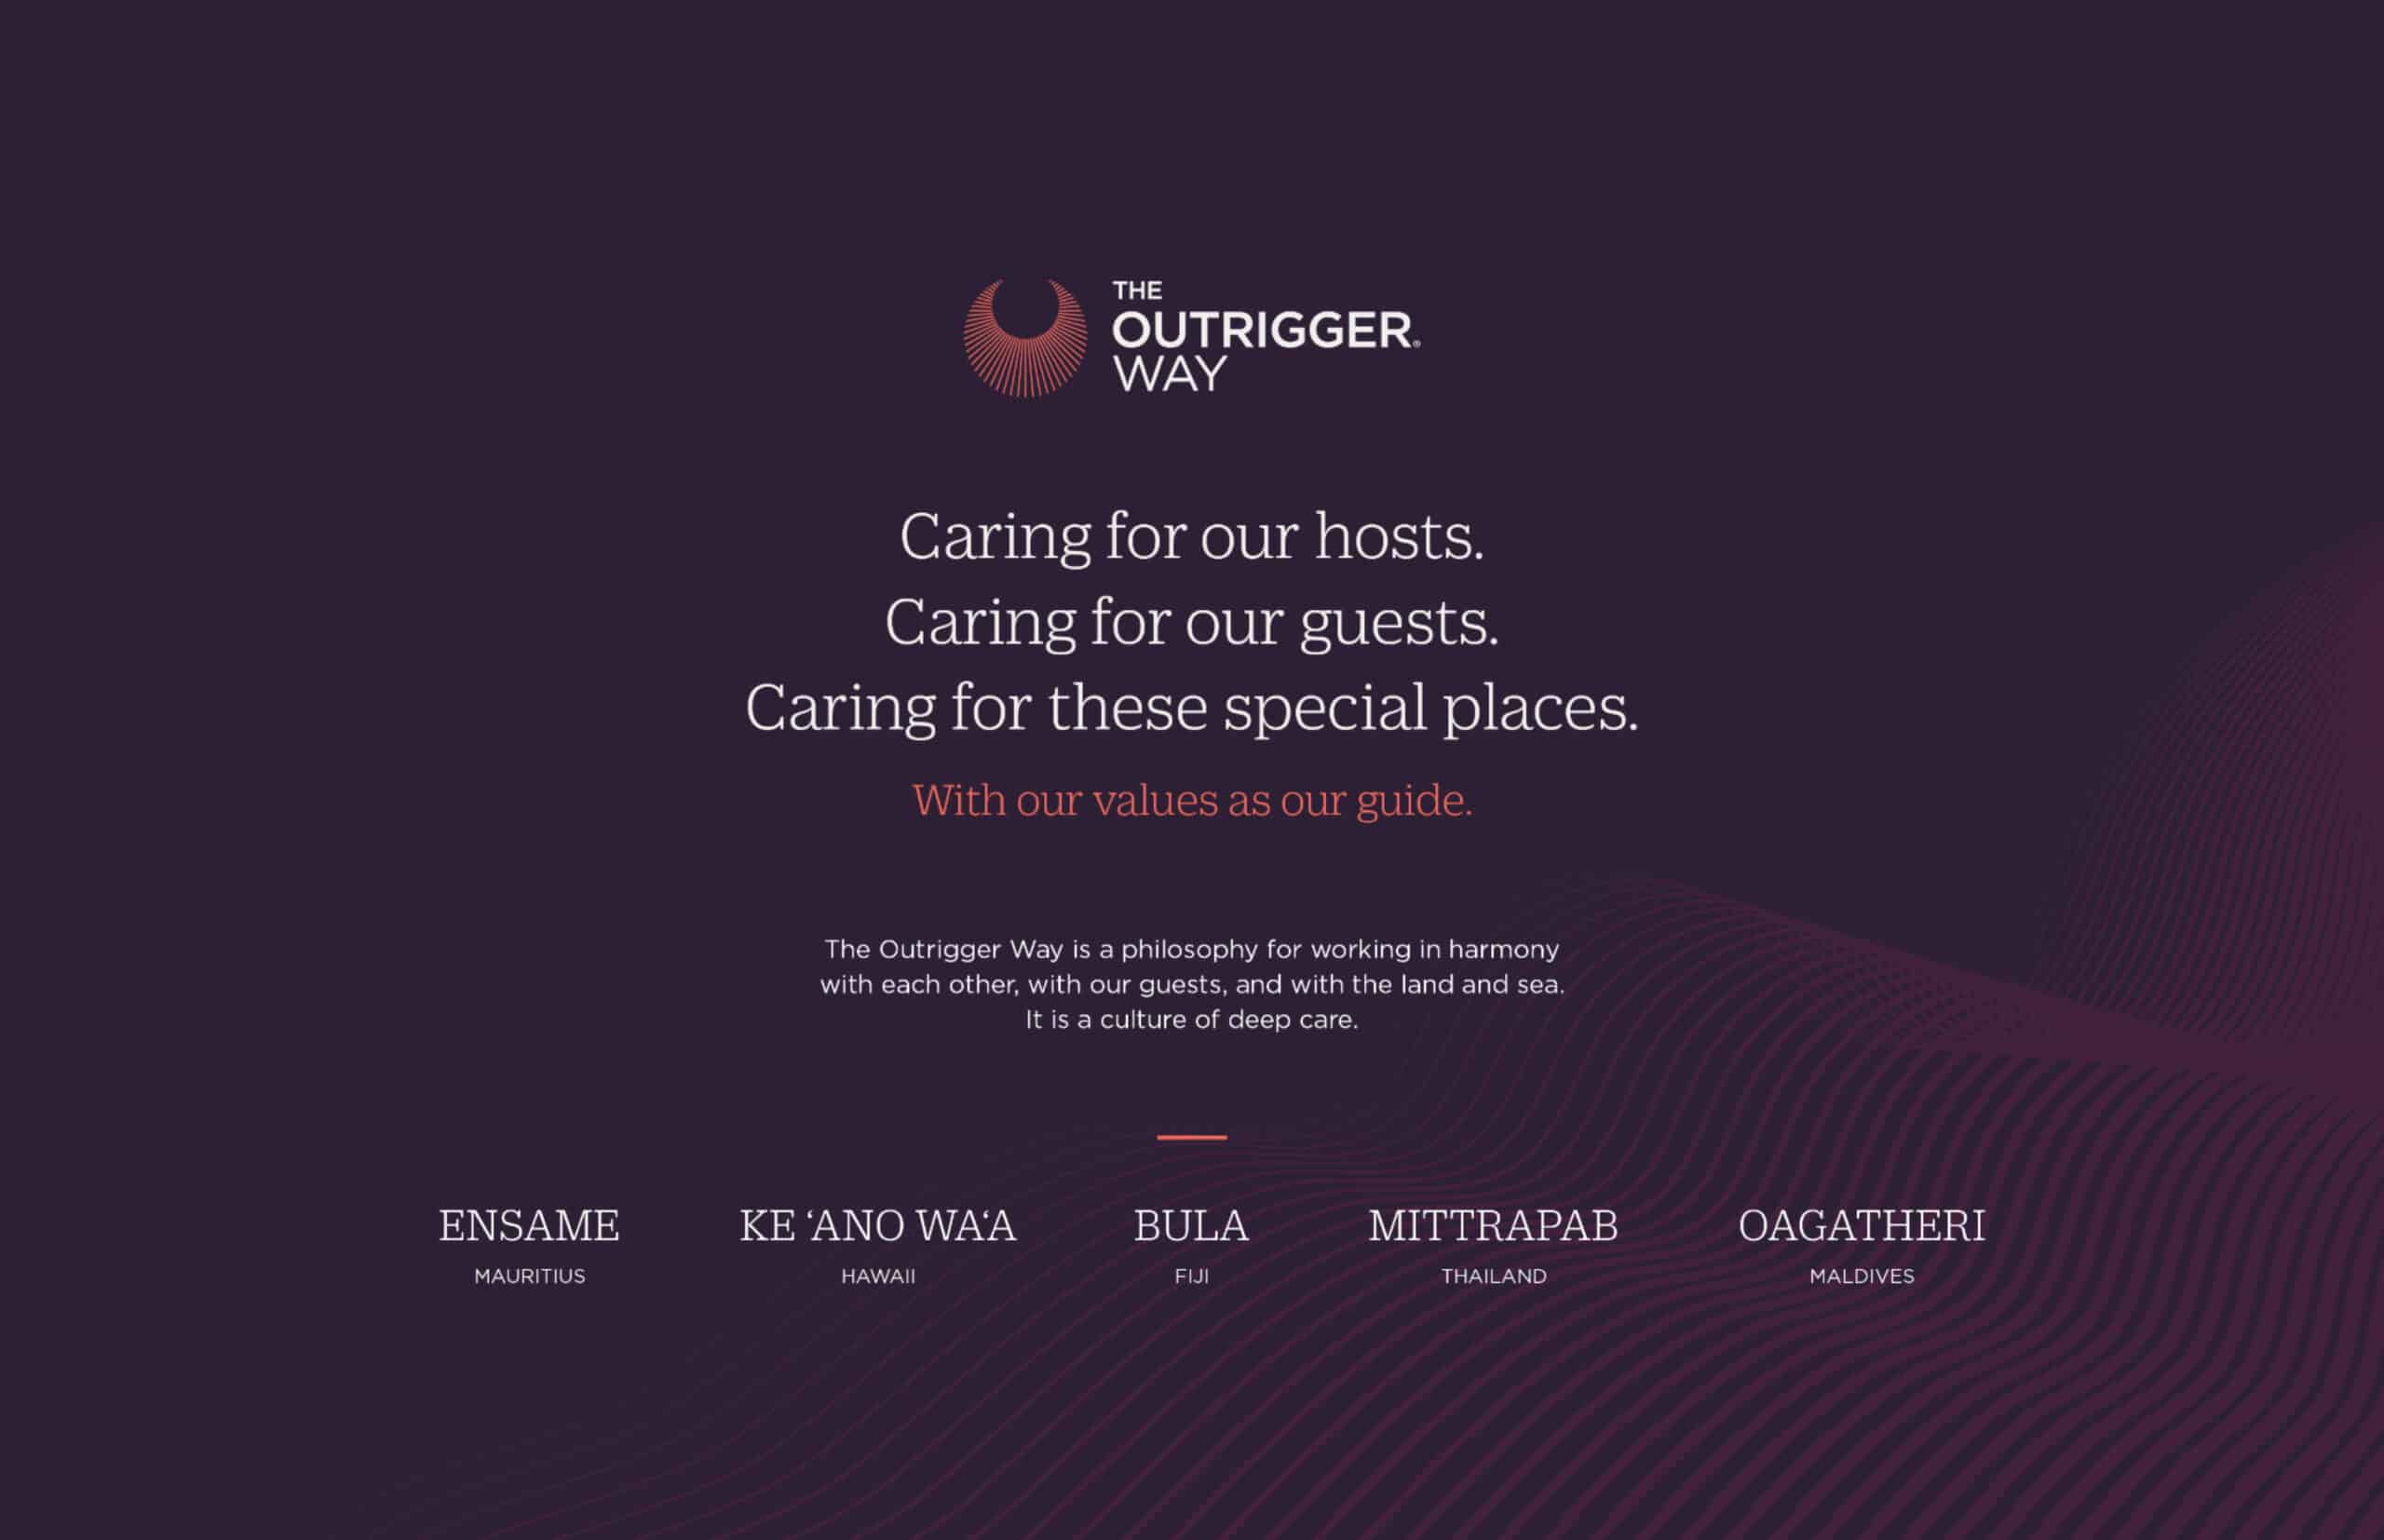 Dark purple background with copy reading in white type: “The Outrigger Way (logo), Caring for our hosts. Caring for our guests. Caring for these special places. With our value as our guide. (in red type)” new paragraph: “The Outrigger Way is a philosophy for working in harmony with each other, with our guests, and with the land and sea. It is a culture of deep care.”